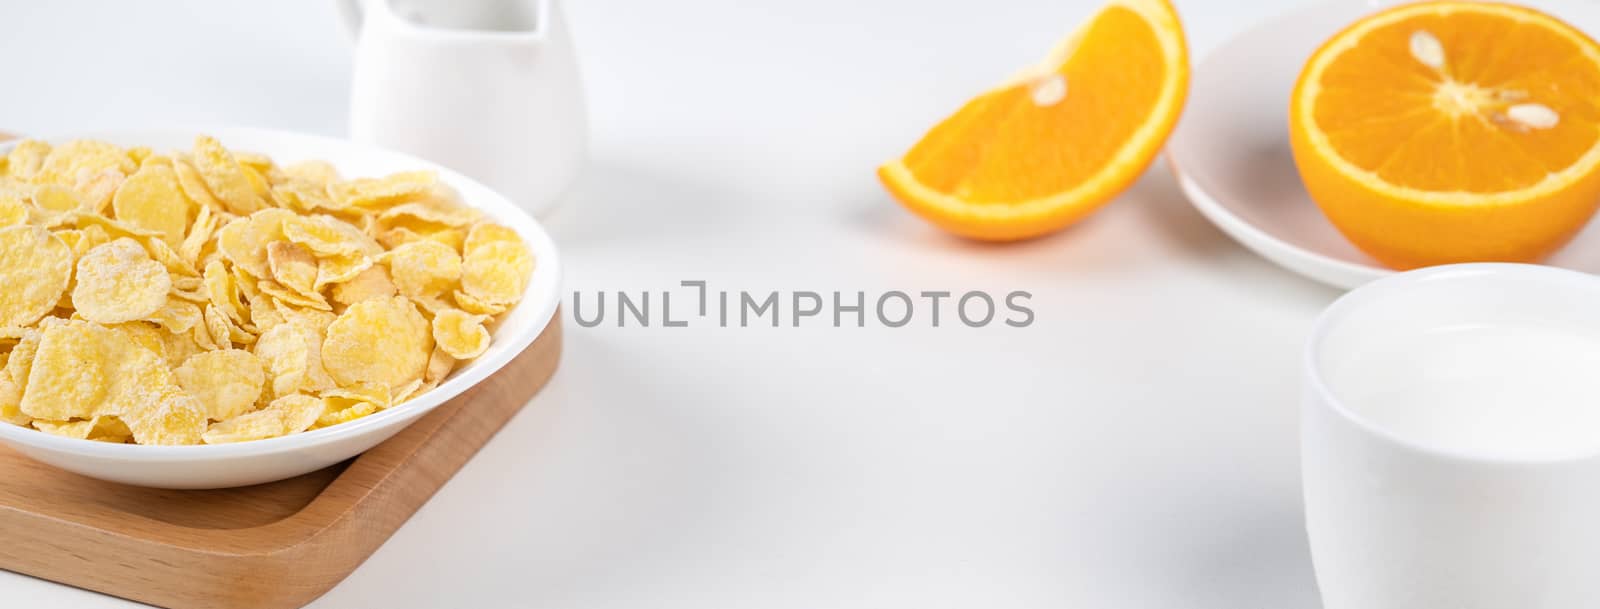 Corn flakes bowl sweeties with milk and orange on white backgrou by ROMIXIMAGE